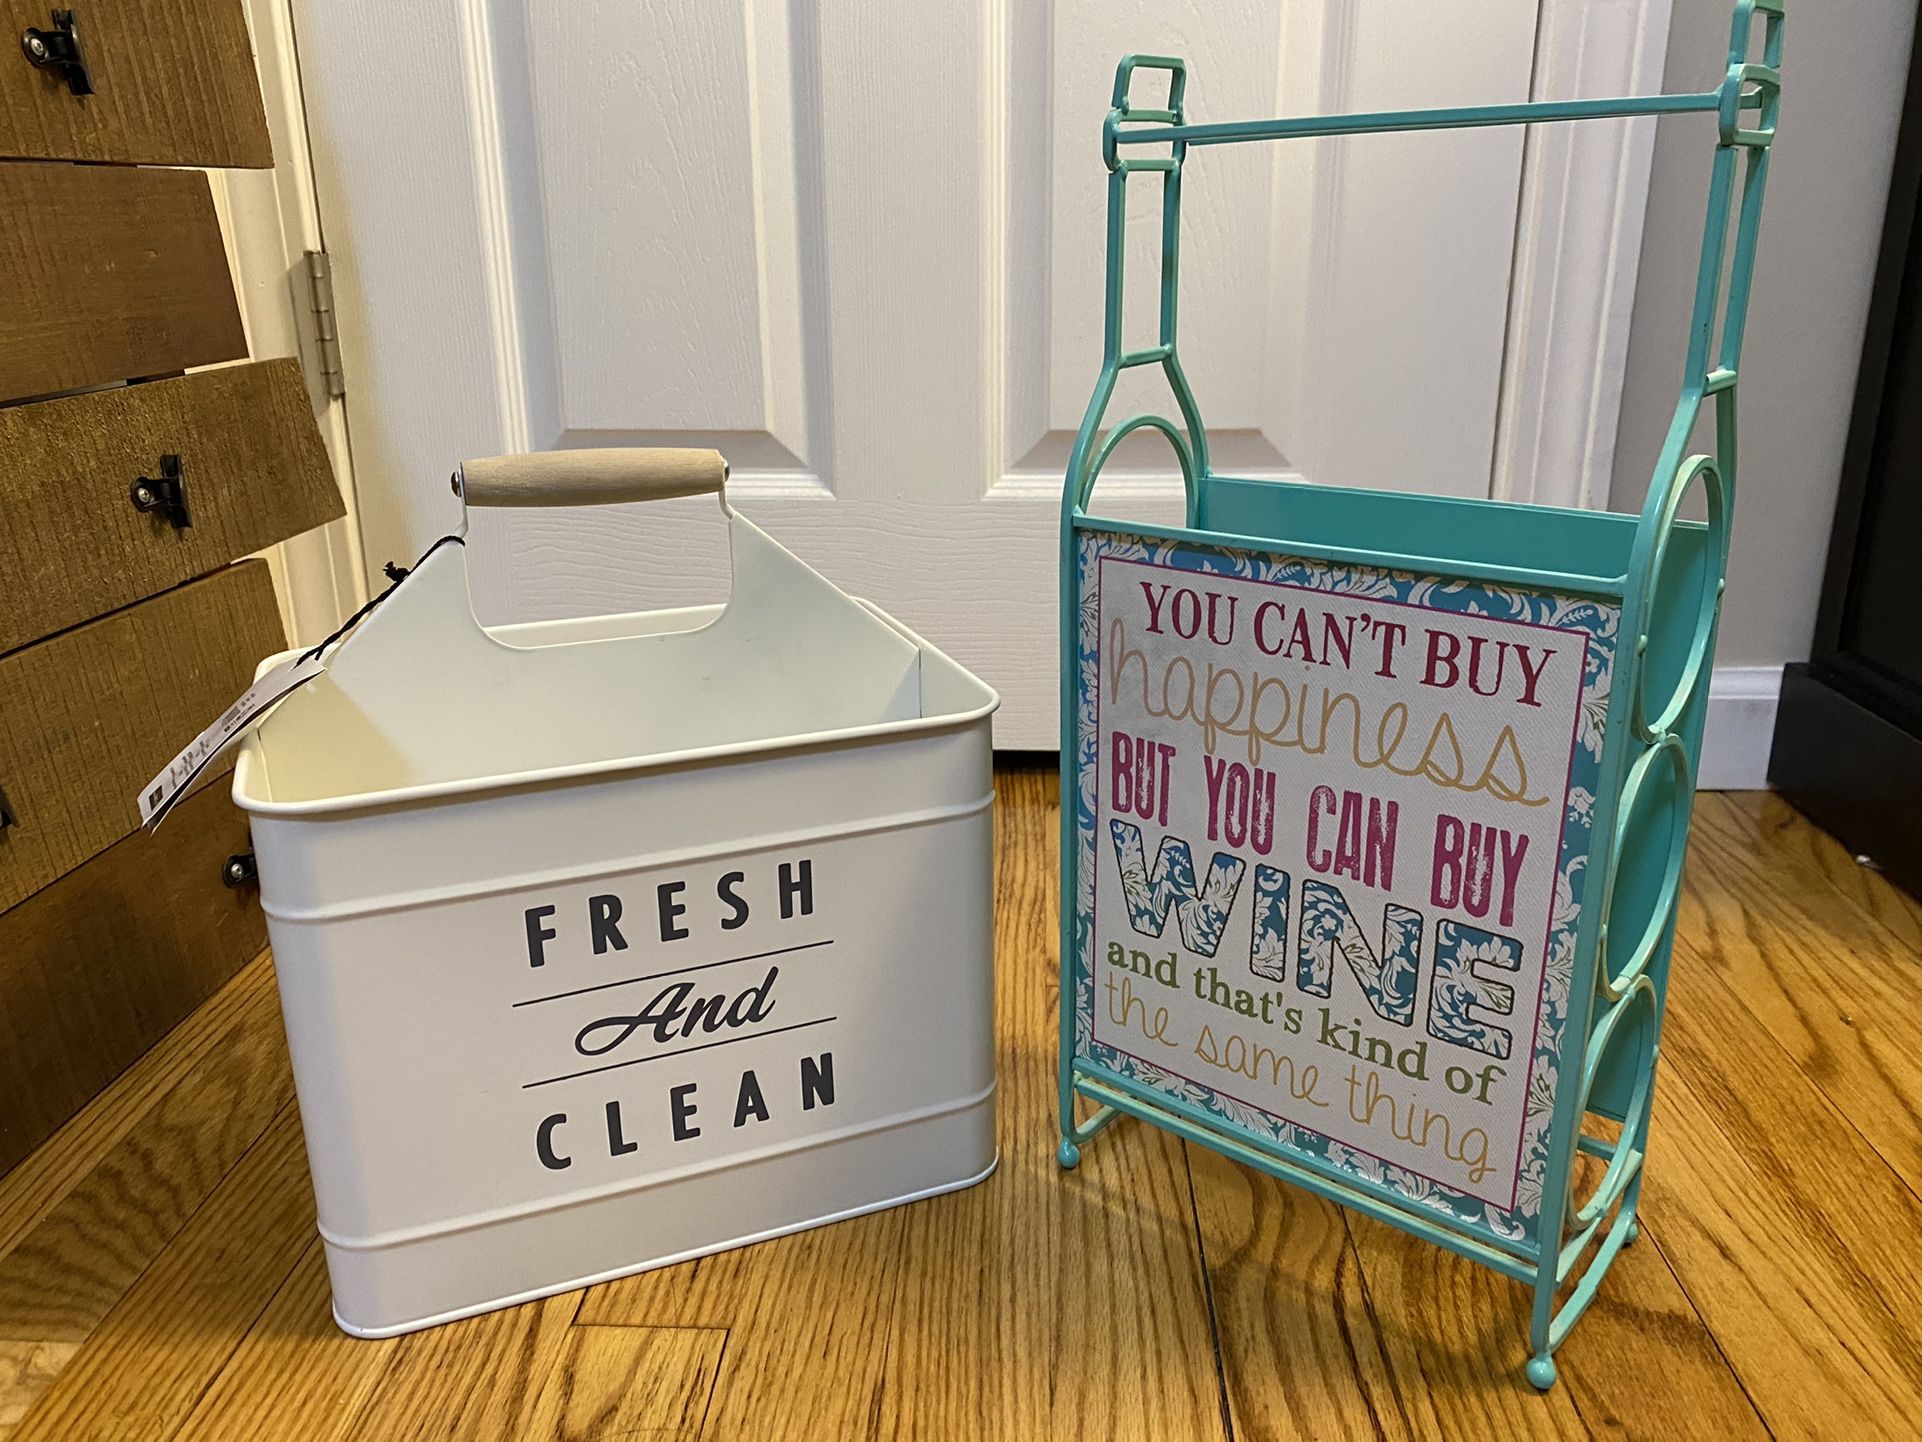 Home decor laundry caddy and 3 bottle wine holder both for $15 new!